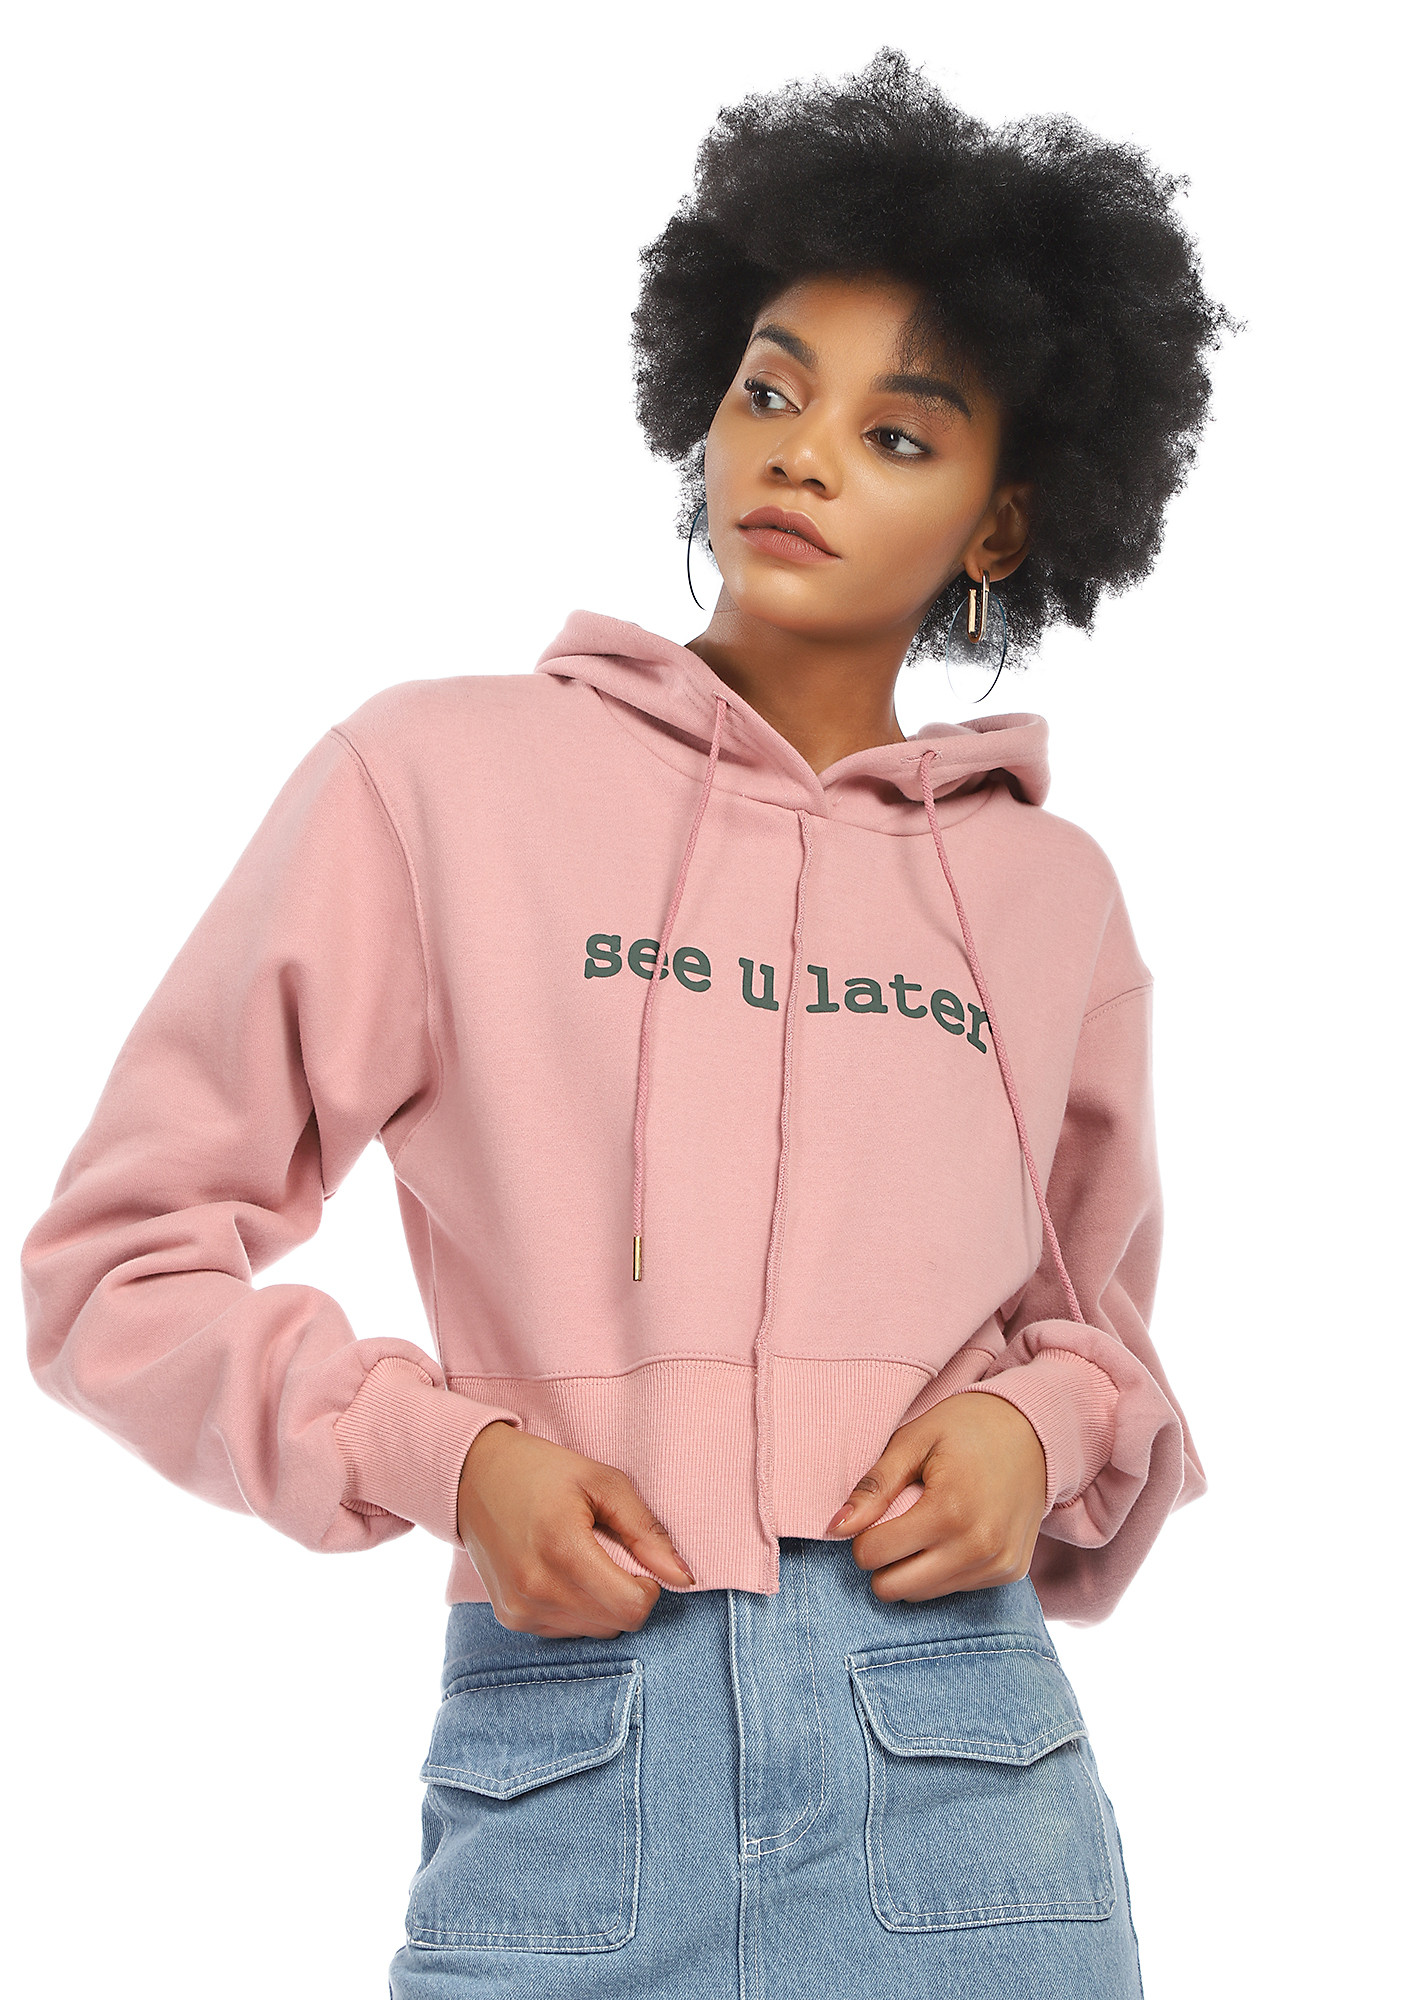 SEE YOU LATER PINK SWEATSHIRT